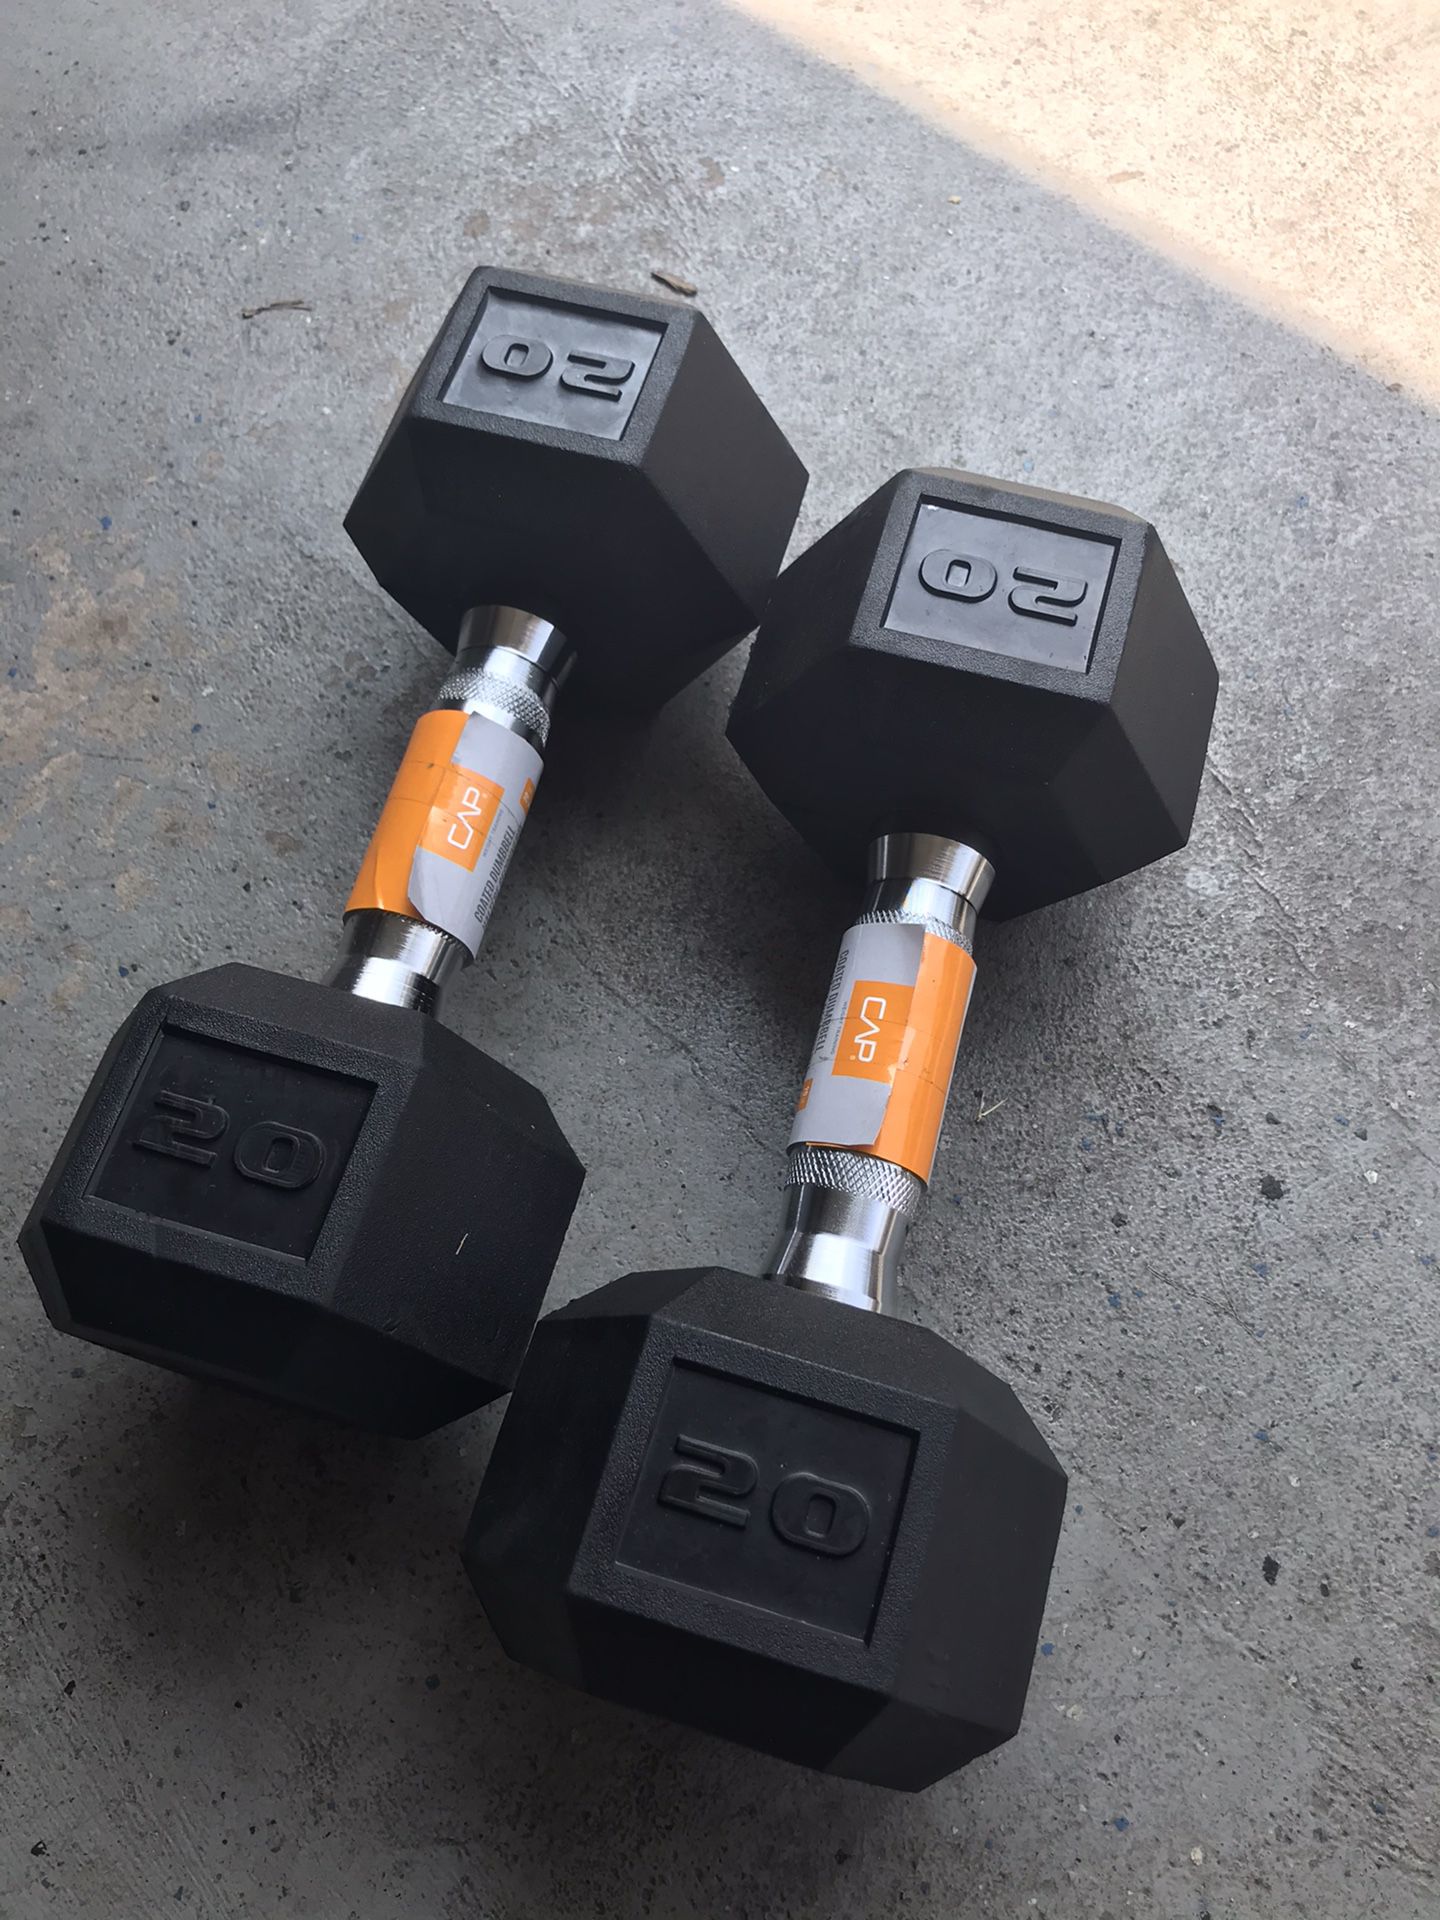 Dumbbell set 2x 20lbs weight NEW